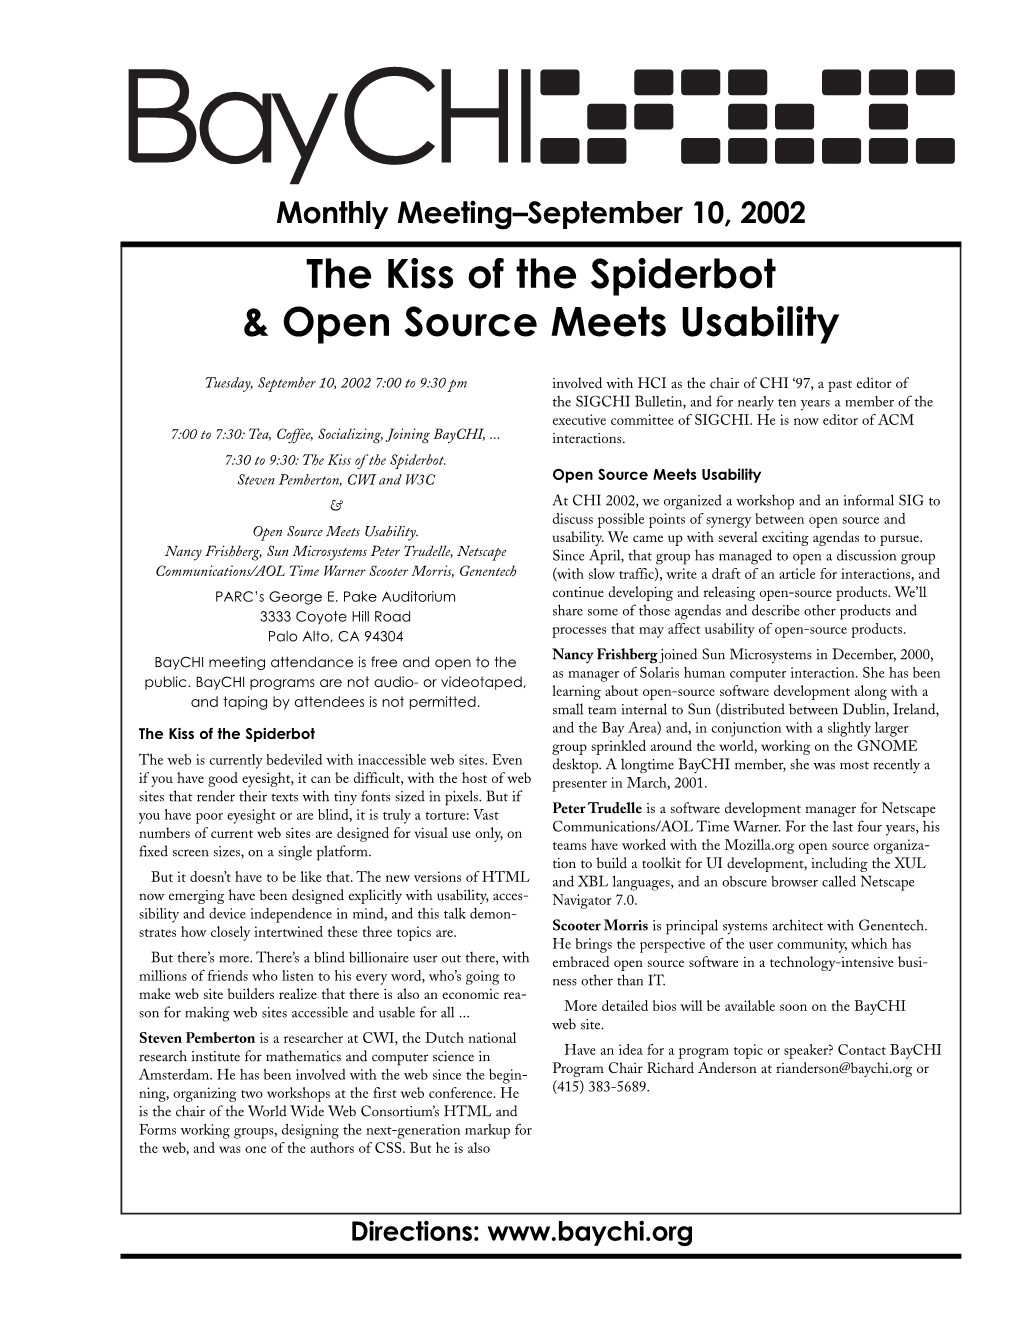 The Kiss of the Spiderbot & Open Source Meets Usability